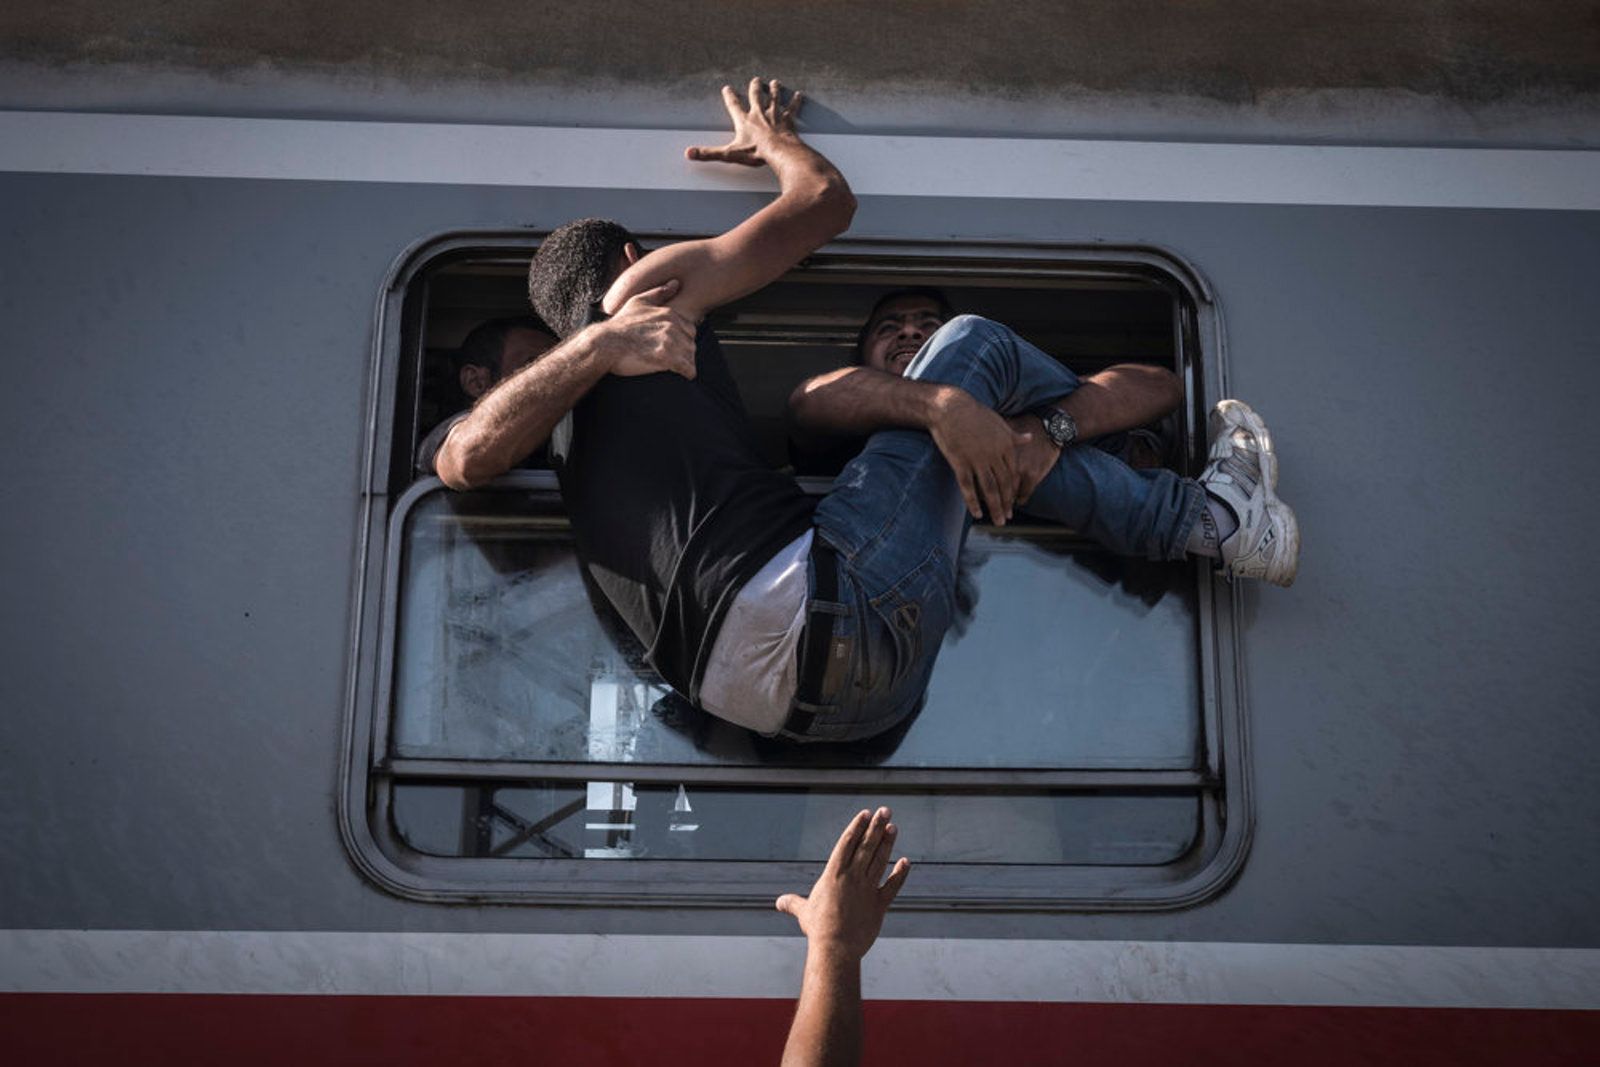 © Sergey Ponomarev - Image from the Exodus: A Long Way Home photography project